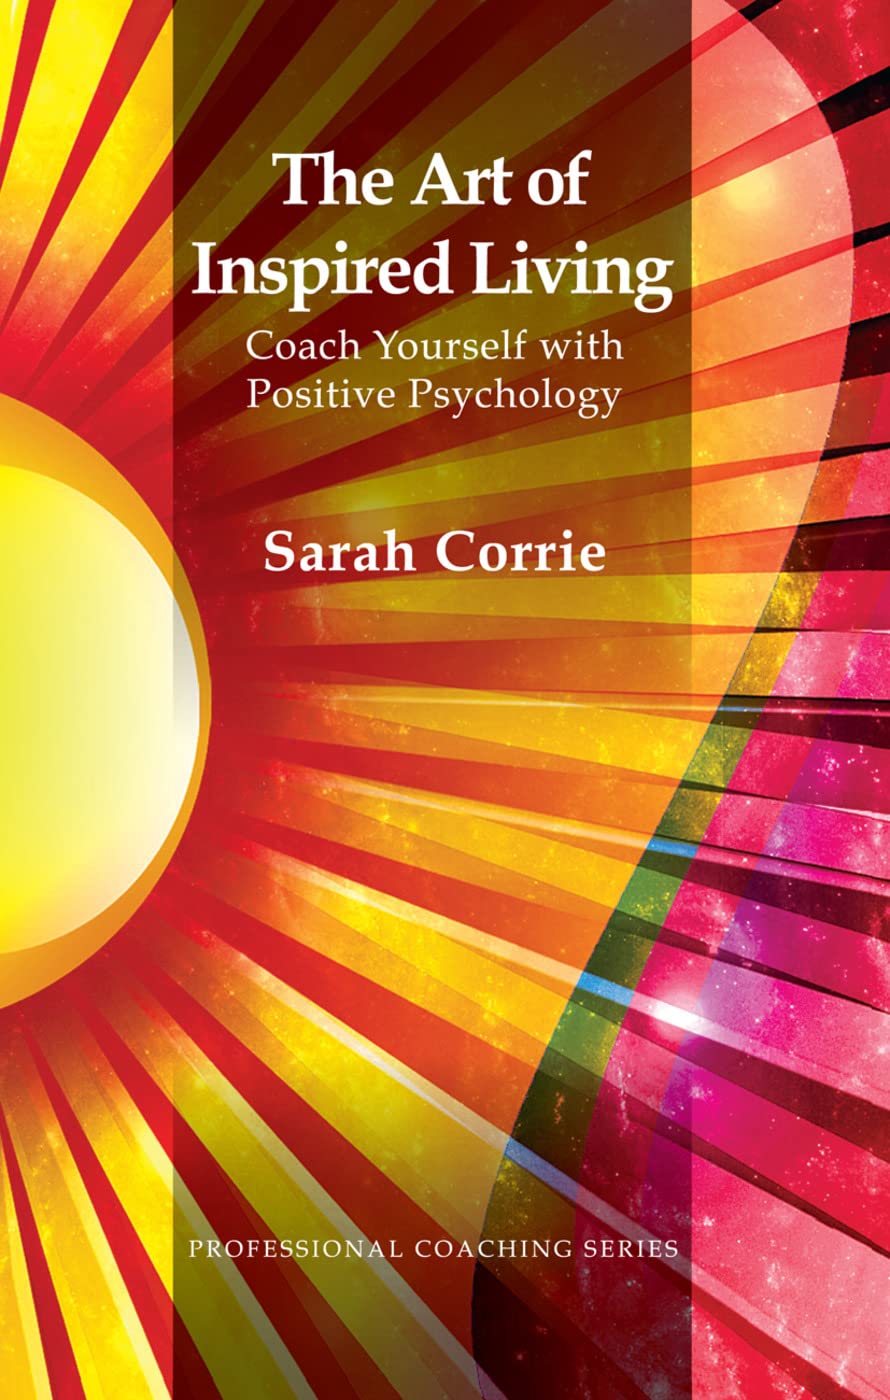 The Art of Inspired Living: Coach Yourself with Positive Psychology by Sarah Corrie